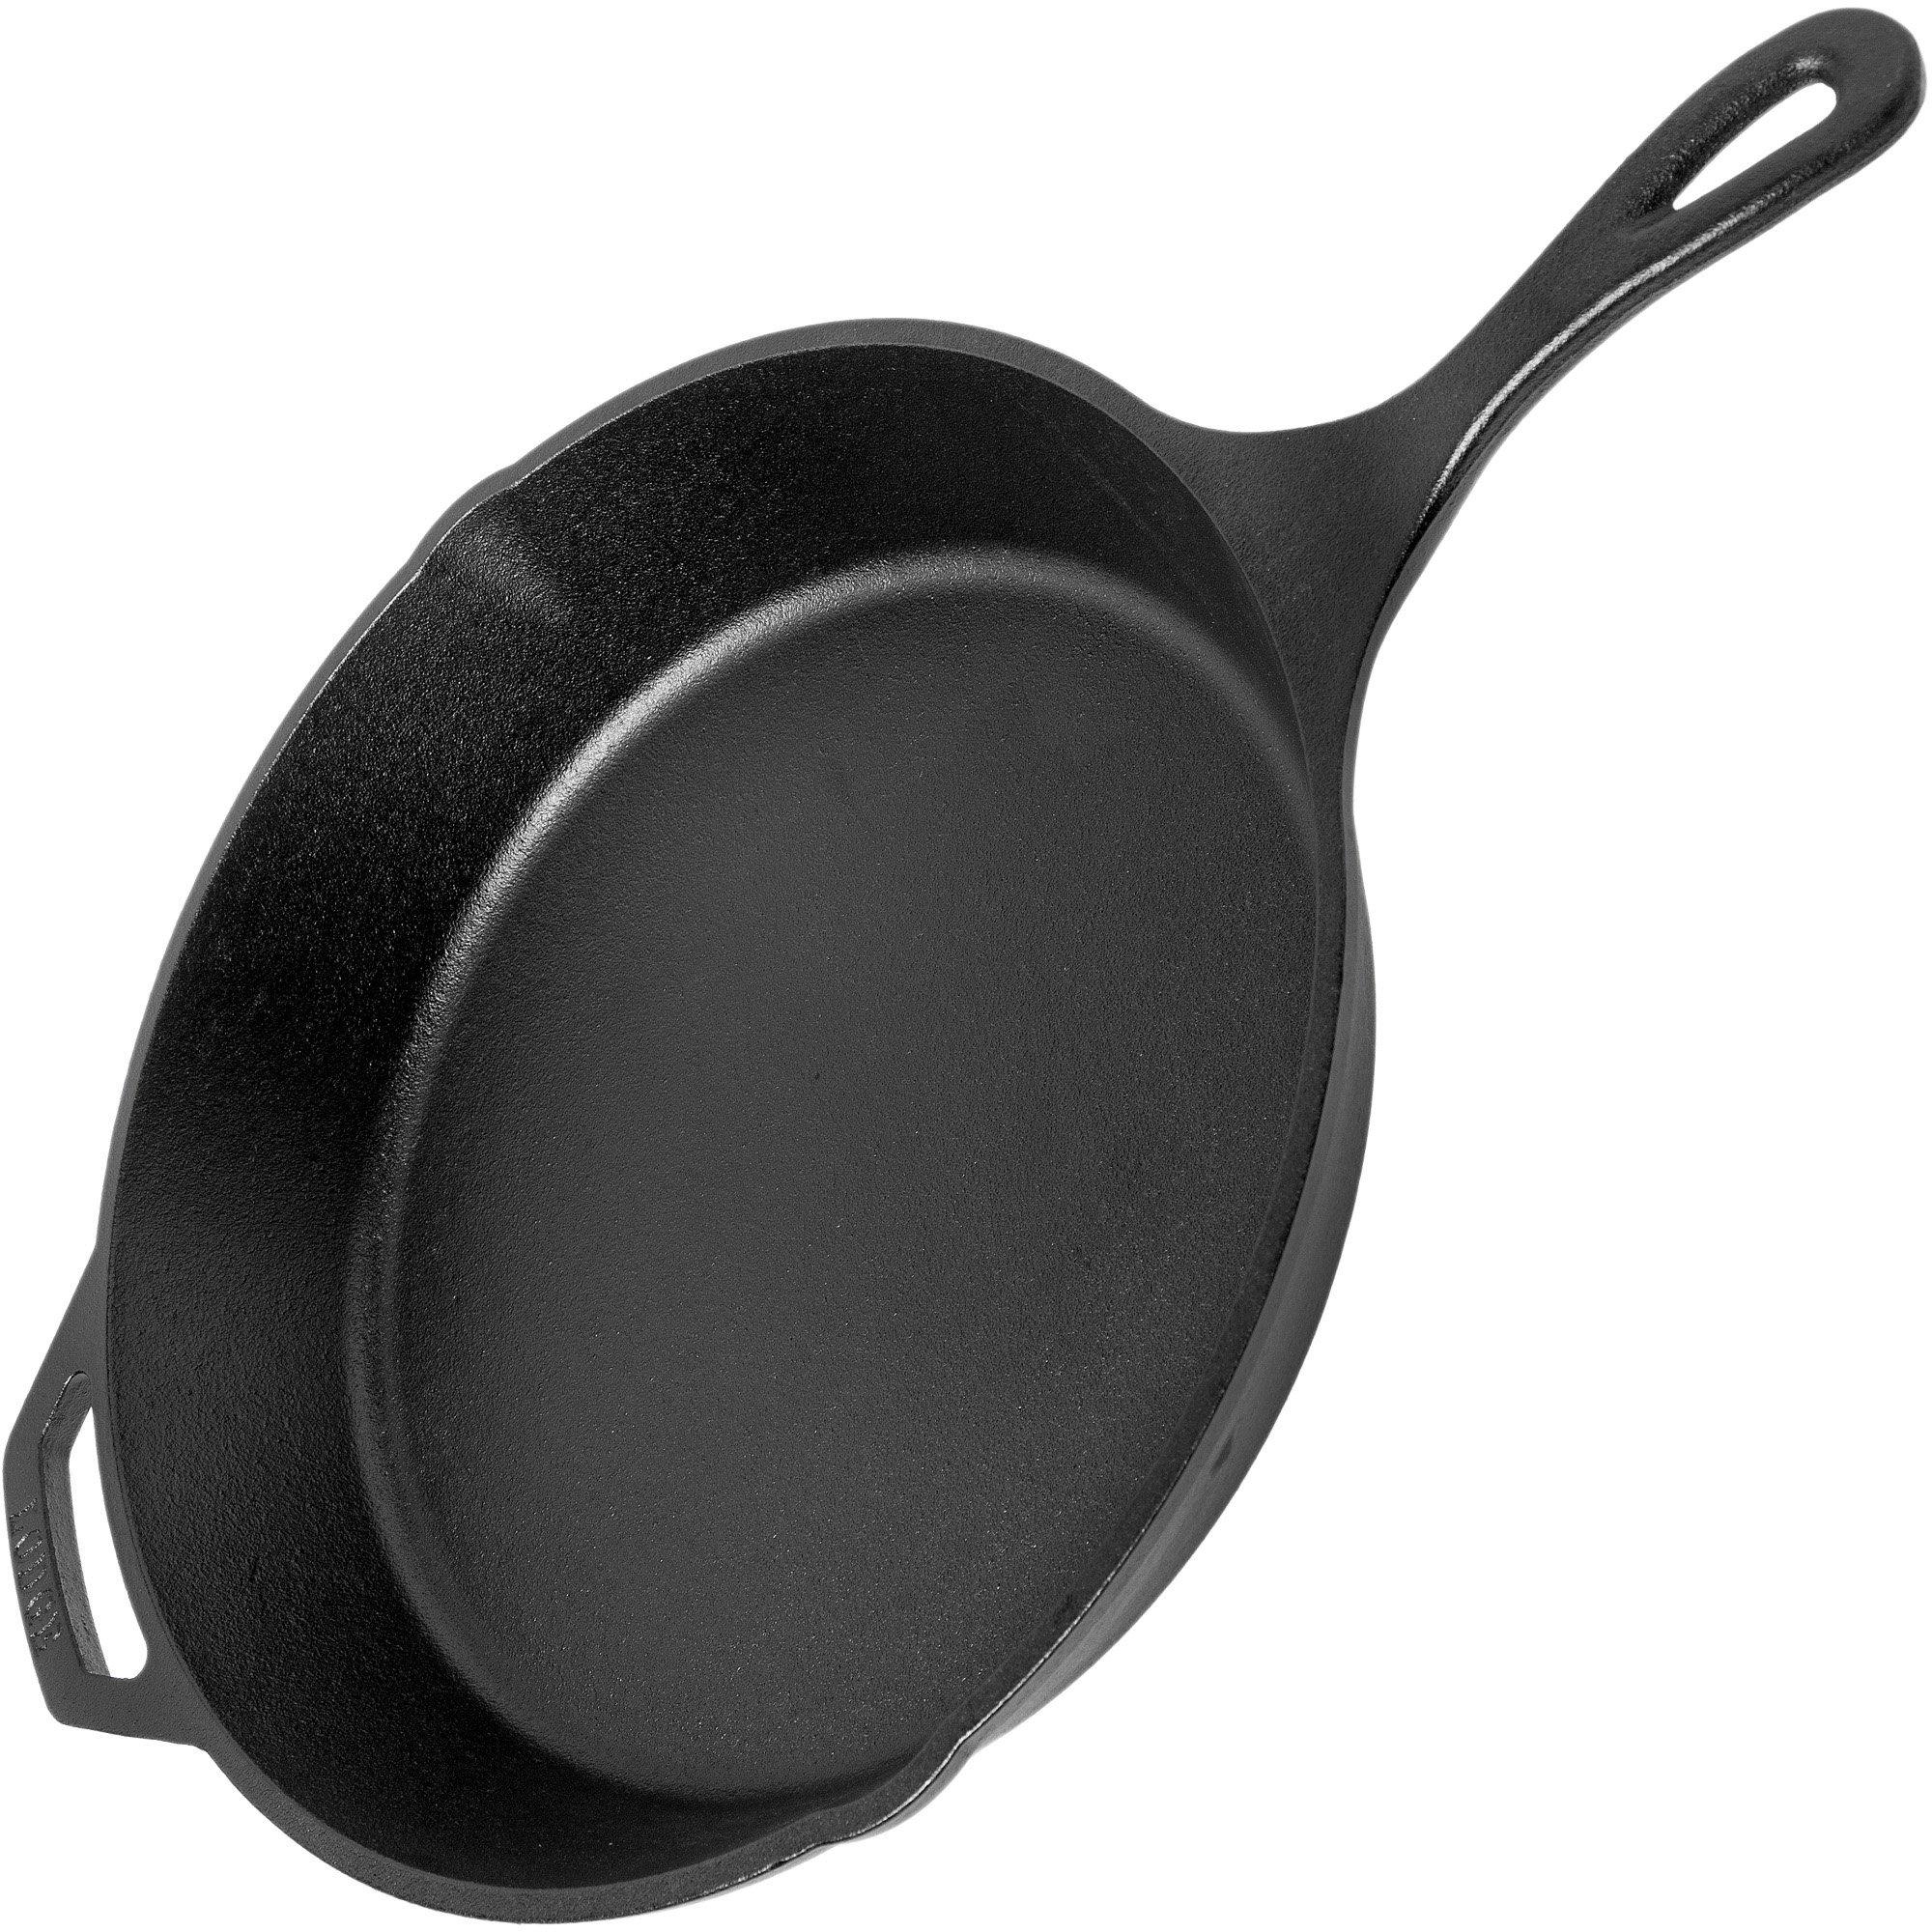 Lodge Skillet lid for frying pans L8IC3, diameter approx. 26 cm